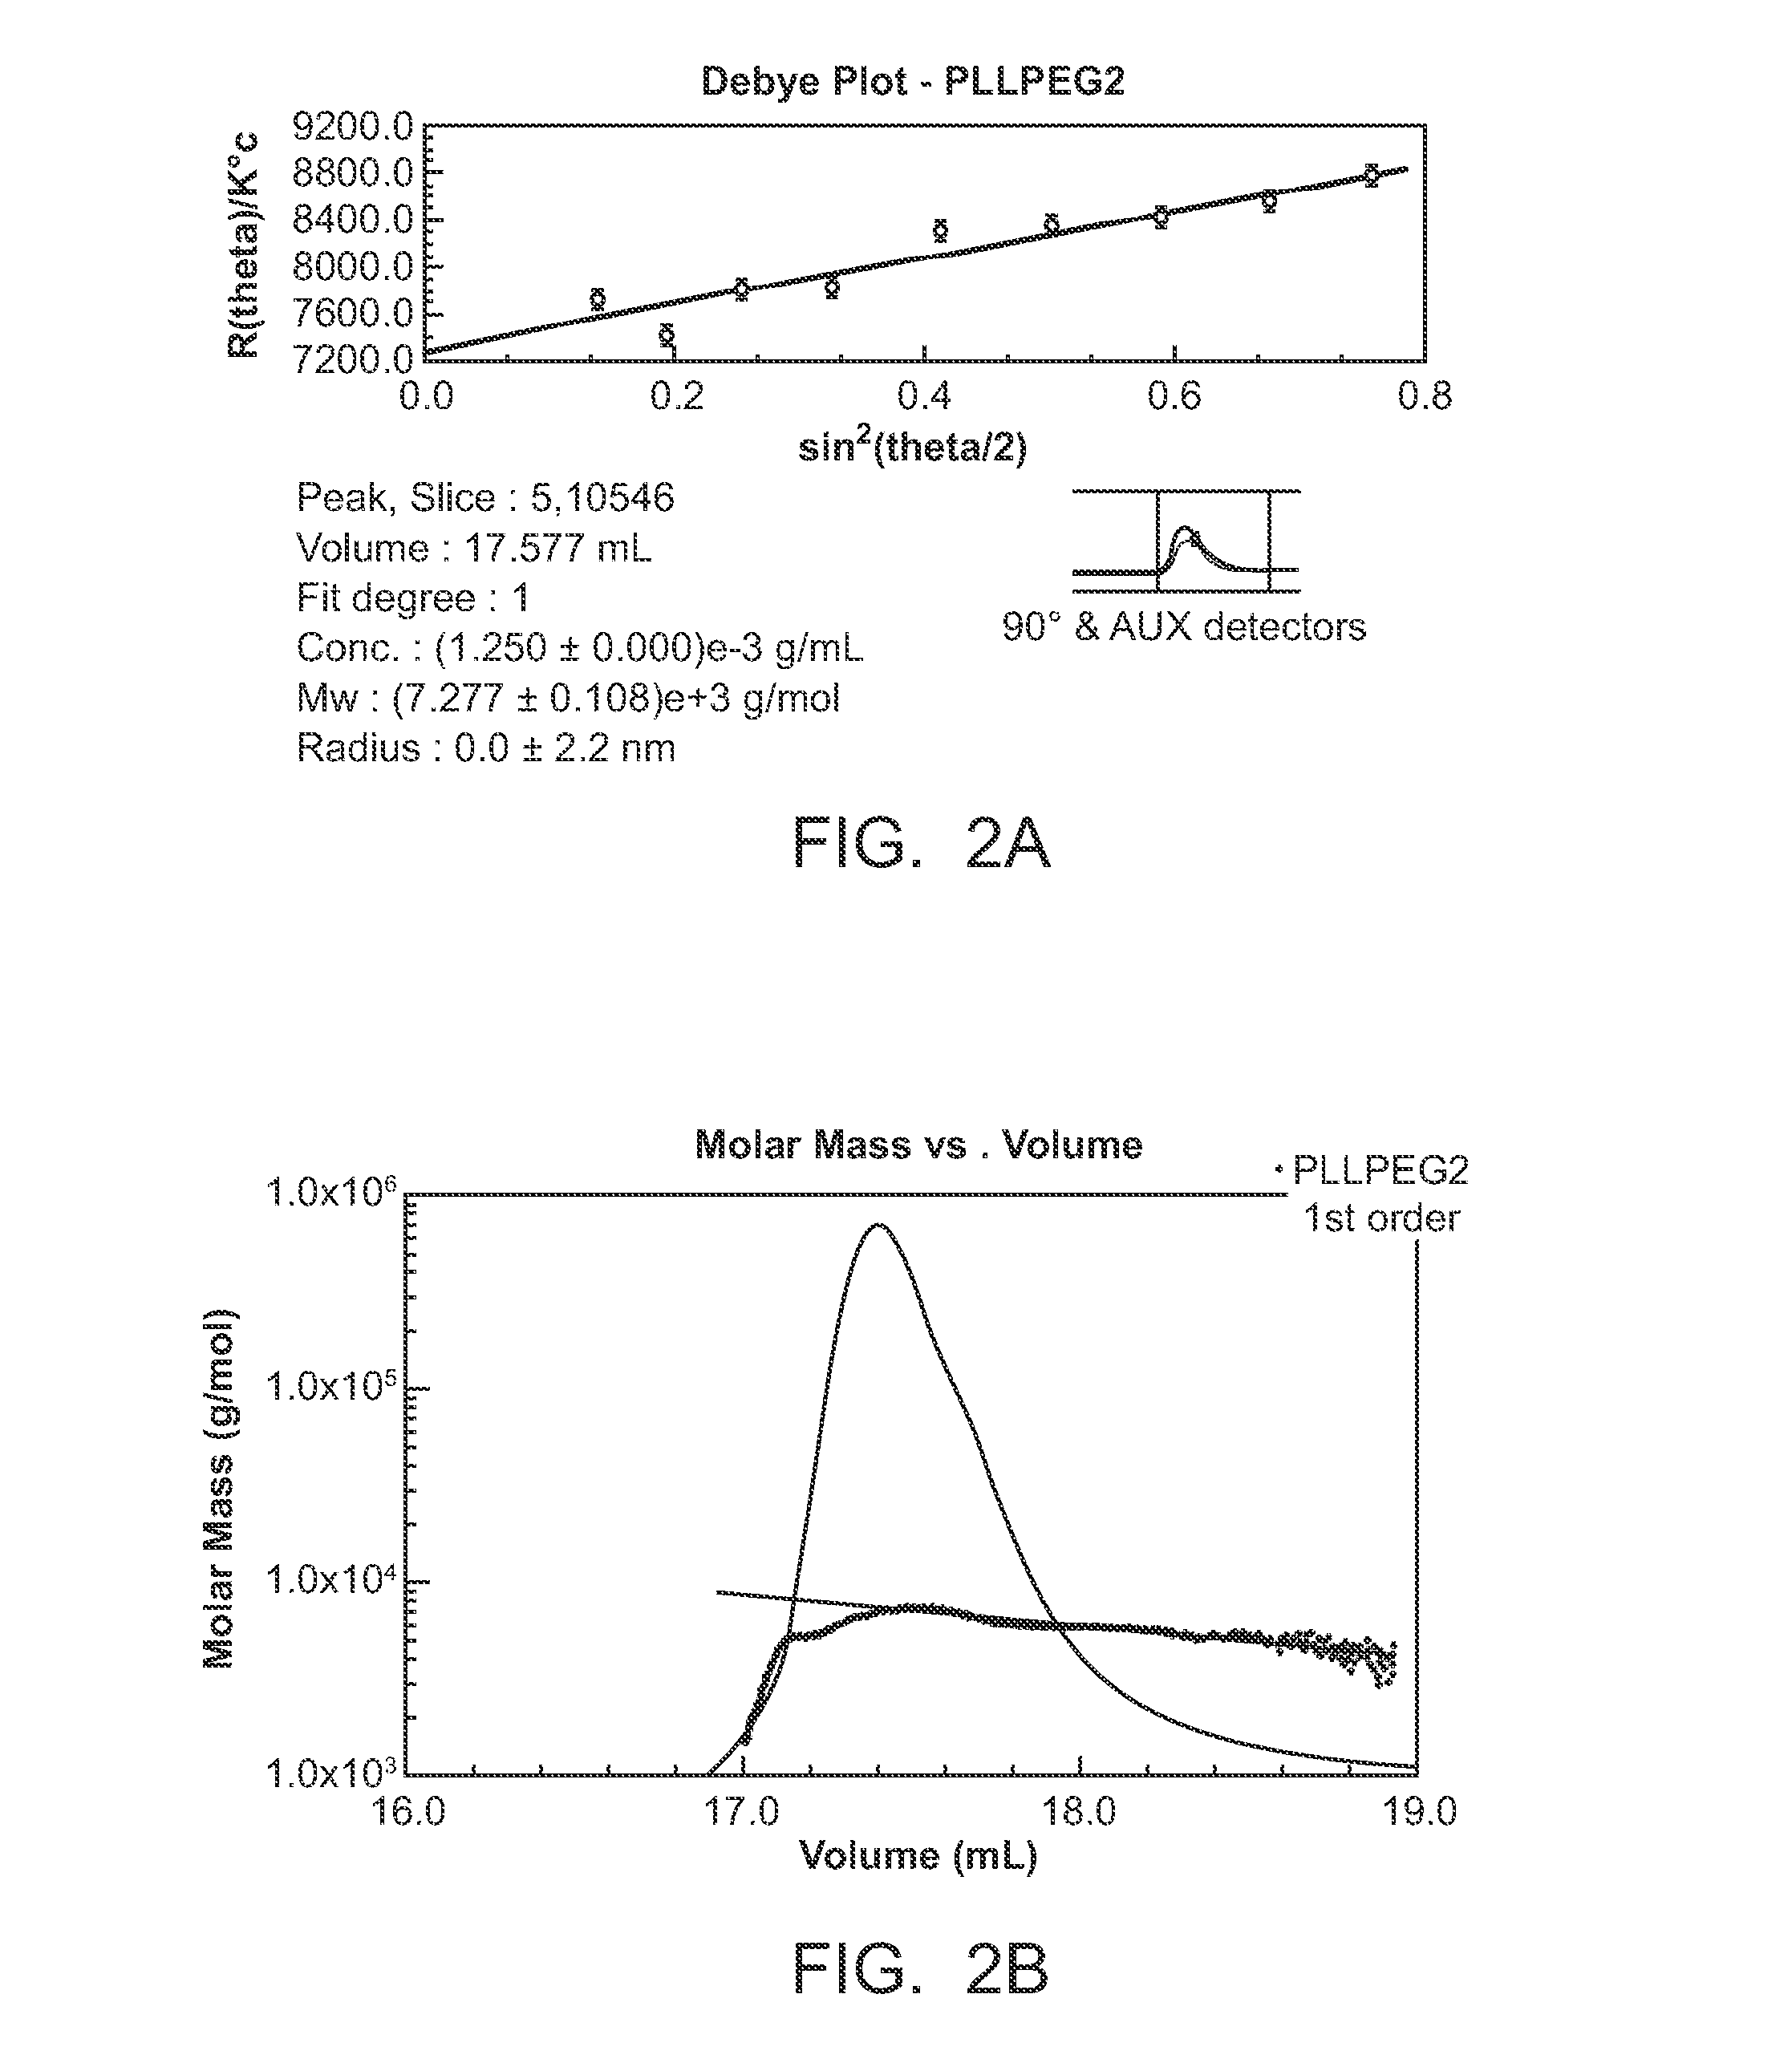 Biodegradable Microspheres and Methods of Use Thereof